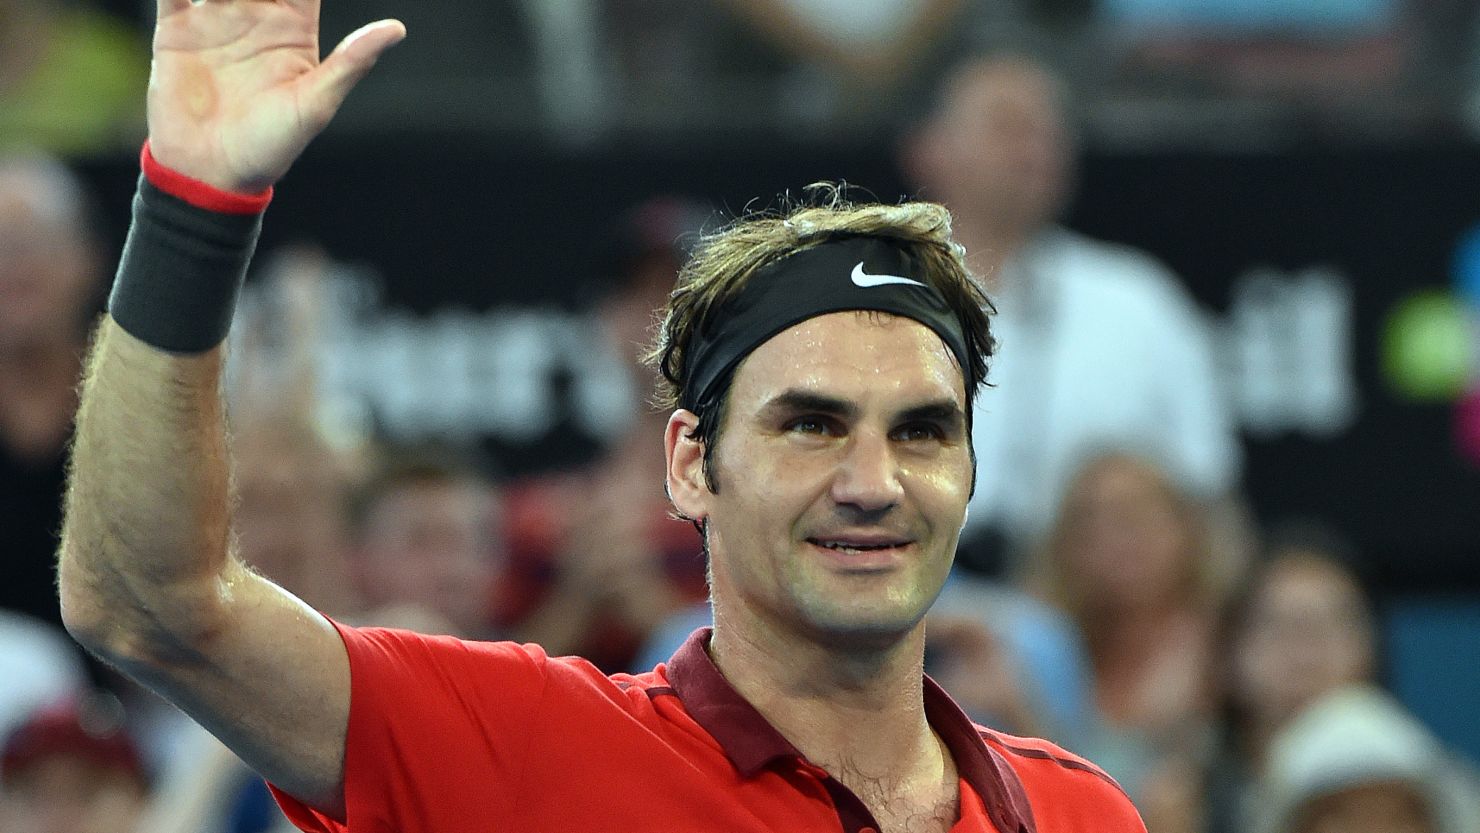 Roger Federer takes the applause after defeating Grigor Dimitrov at the Brisbane International.